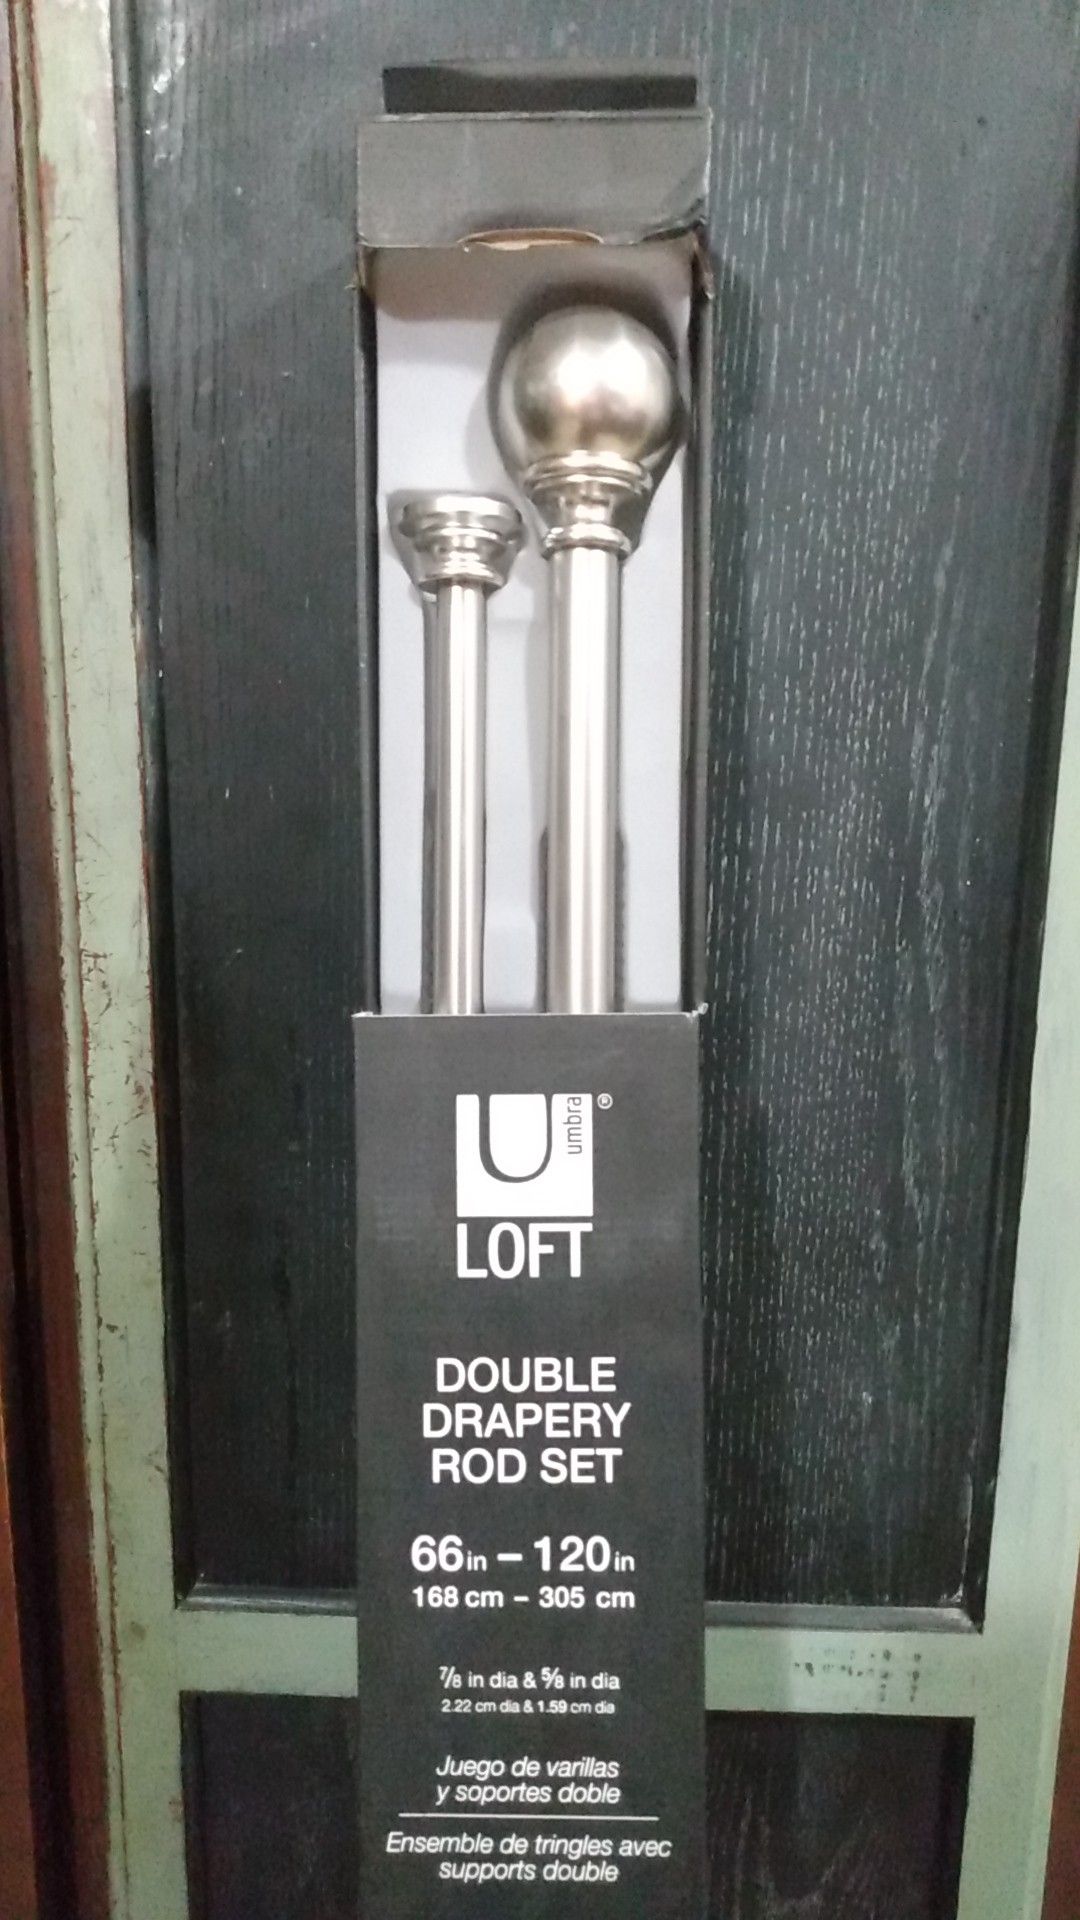 A set of double curtain rods set